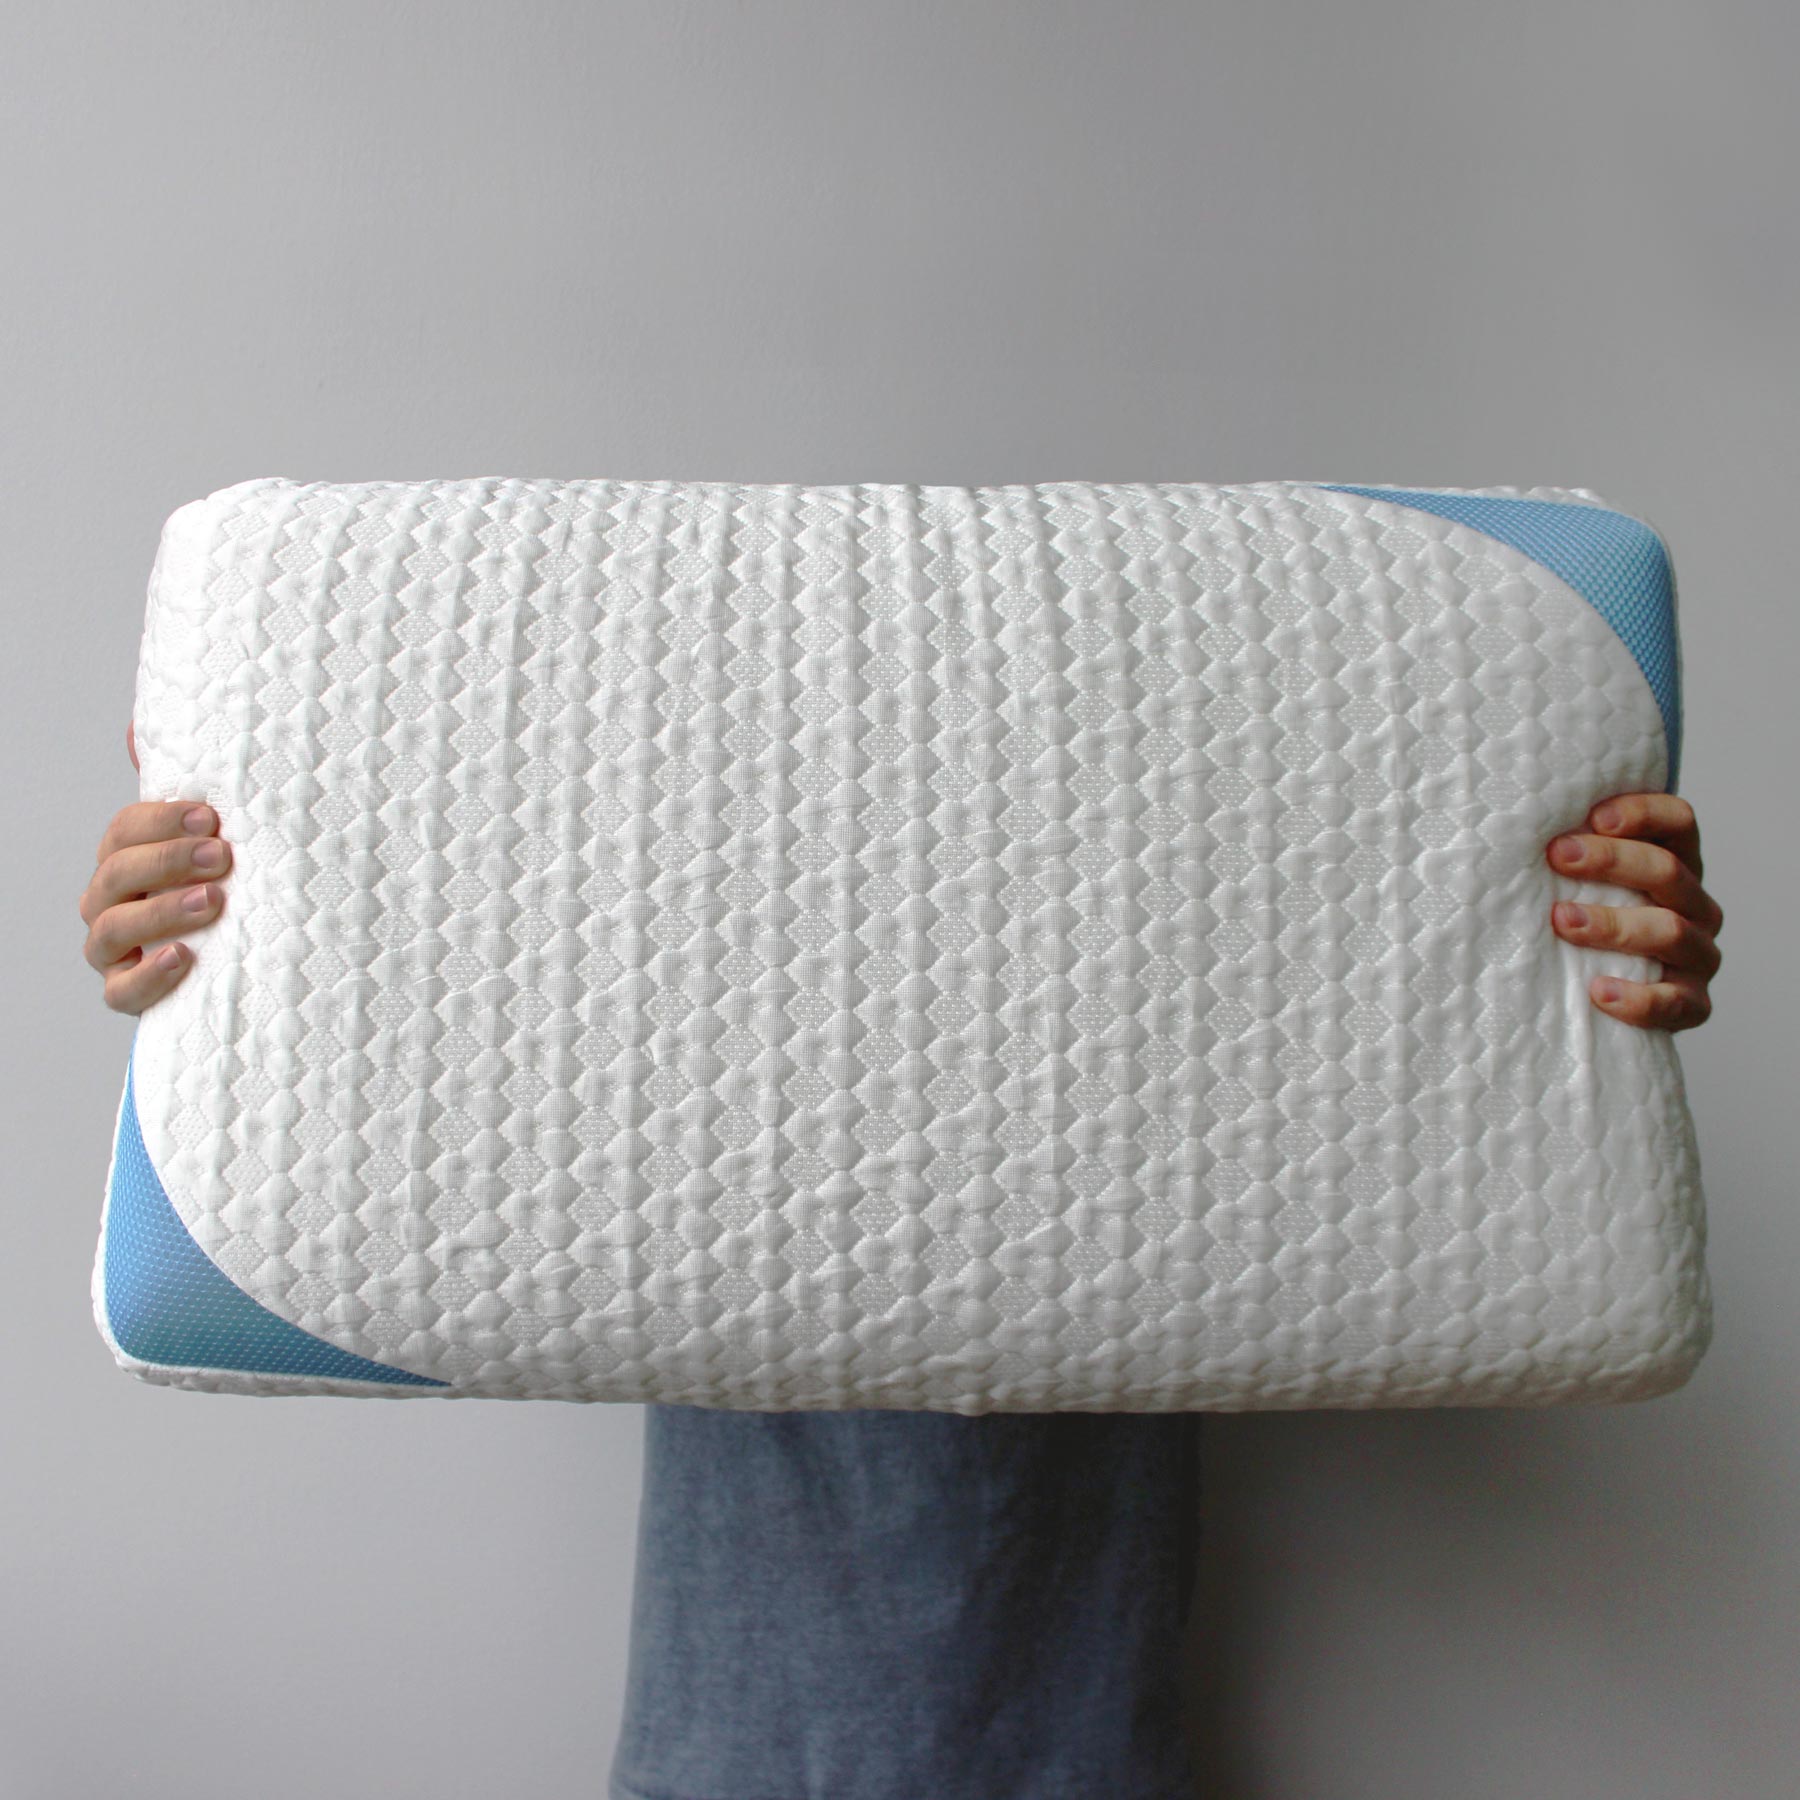 Buy Cushion Covers Online and Get up to 50% Off